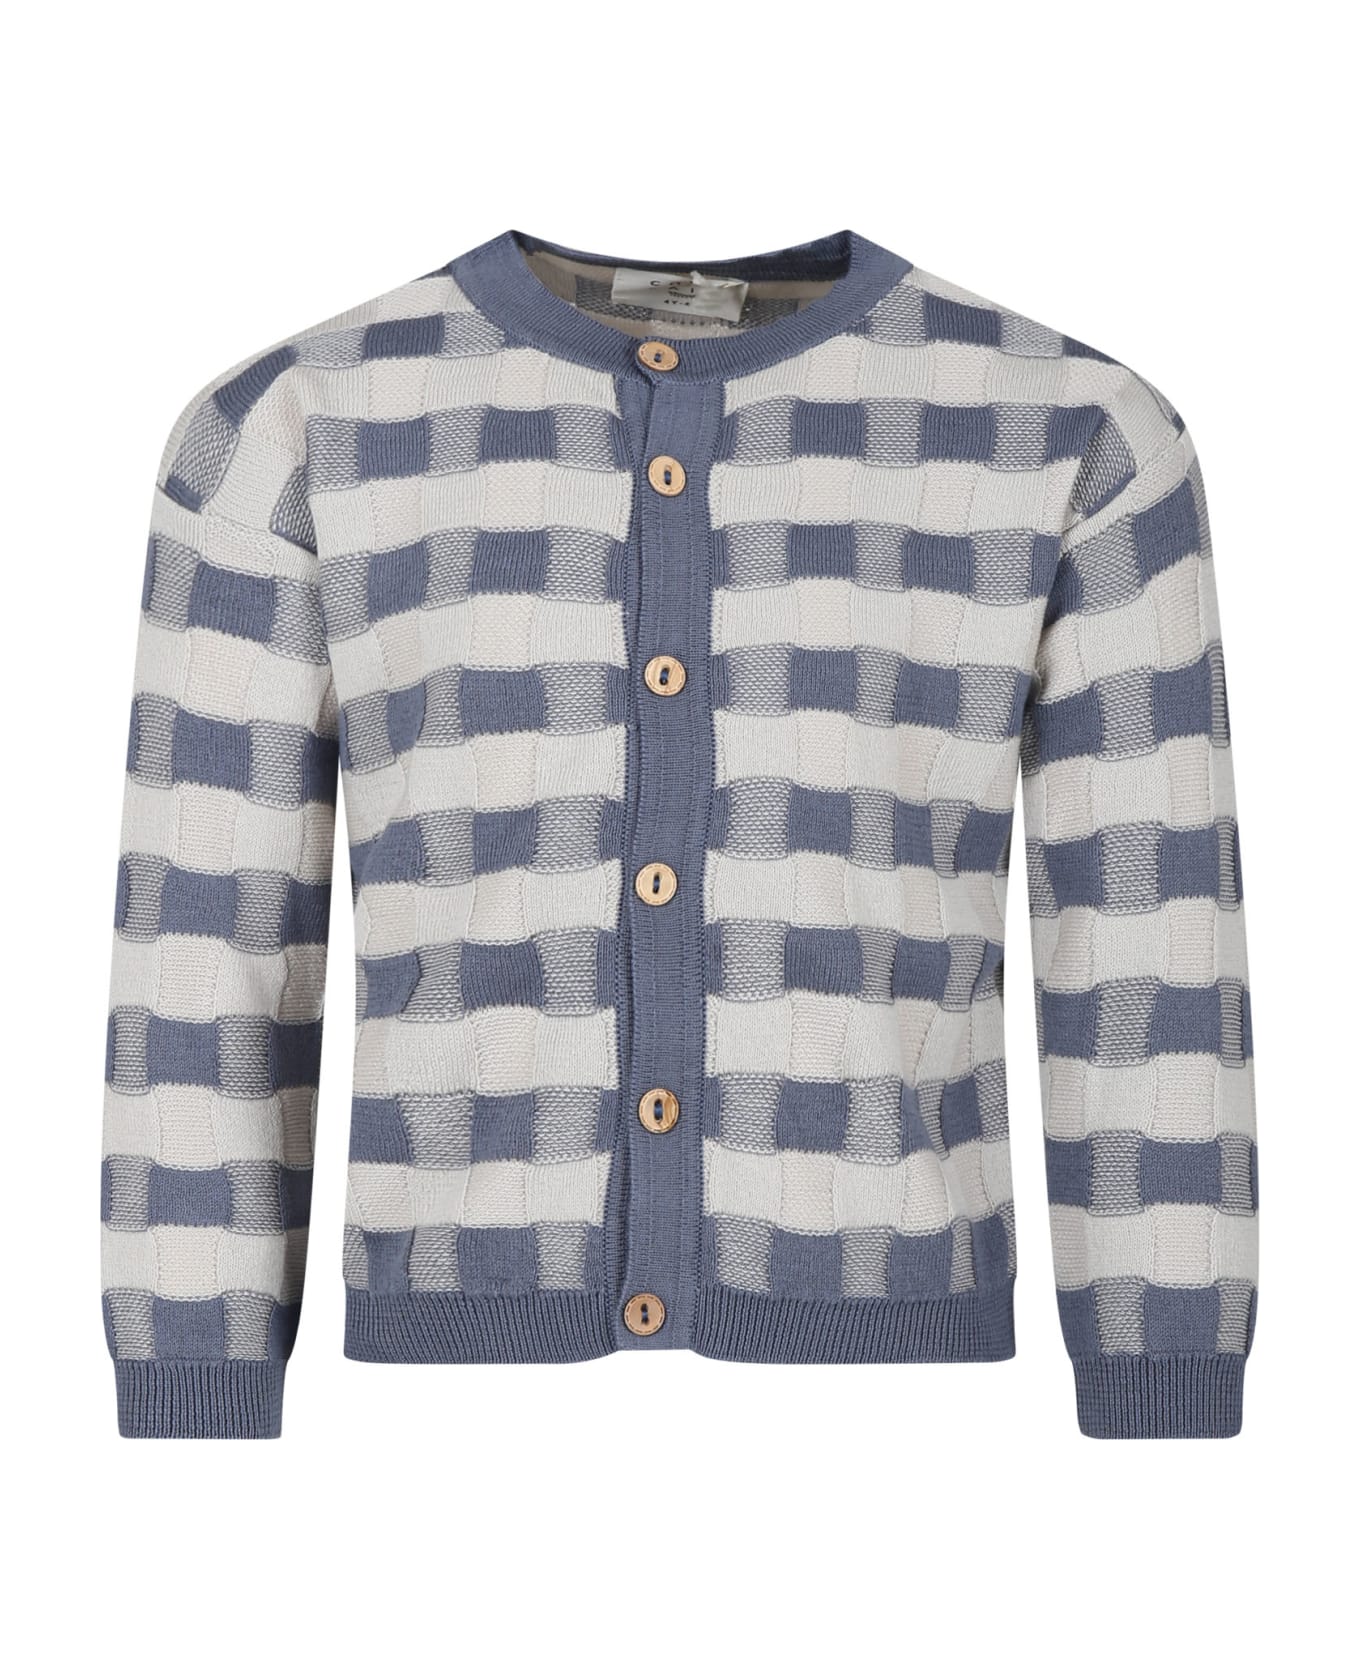 Coco Au Lait Light Blue Cardigan For Girl With Checkered Pattern - Multicolor ニットウェア＆スウェットシャツ